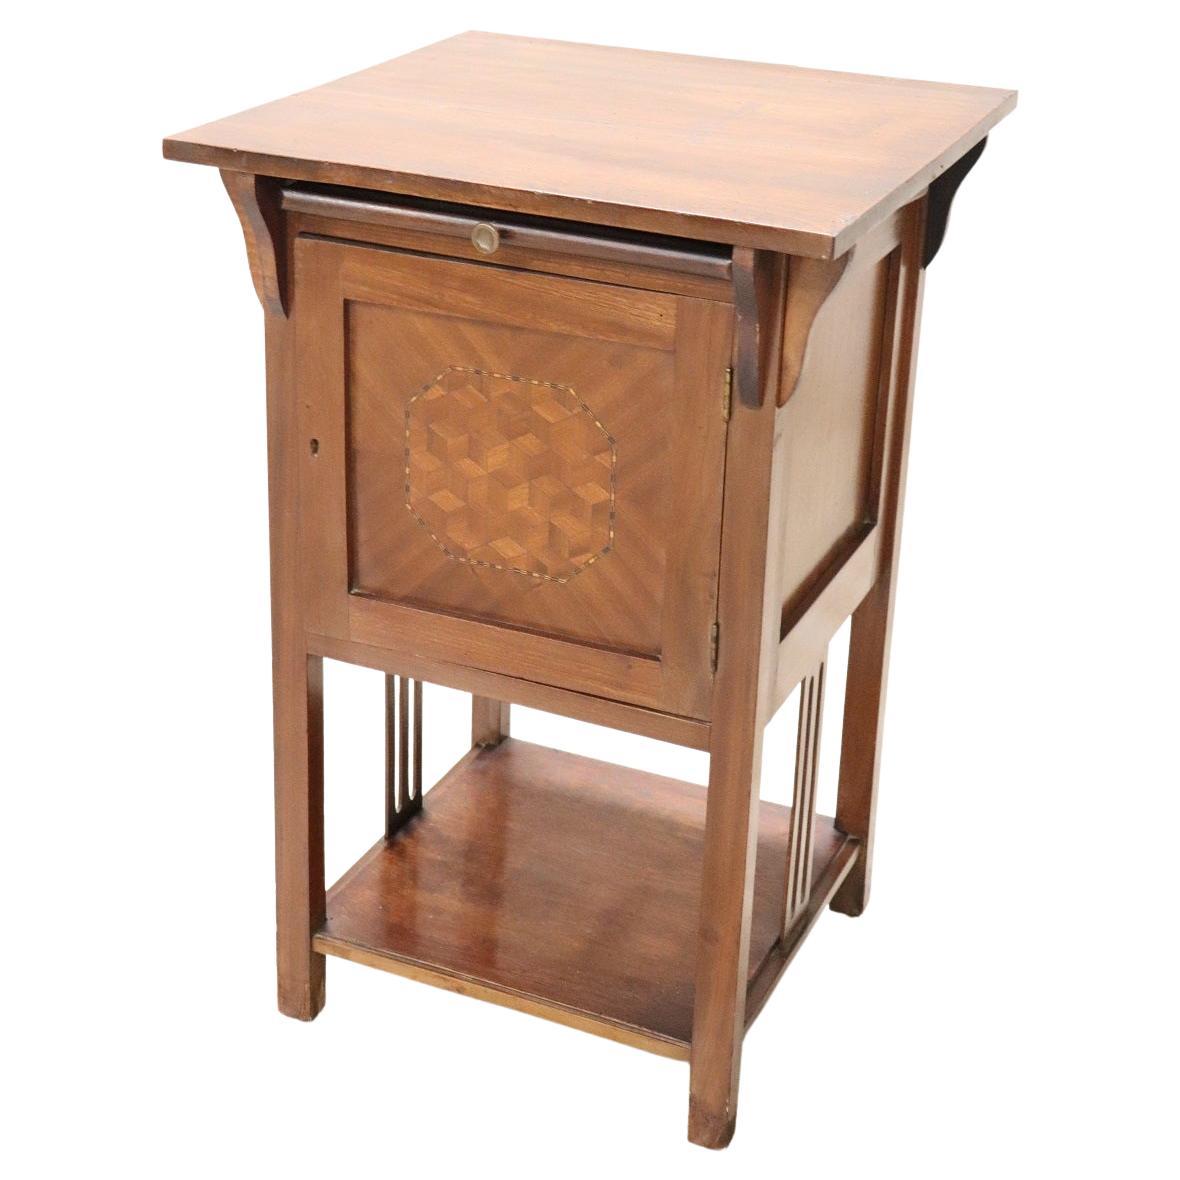 Early 20th Century Art Nouveau Inlaid Wood Side Table